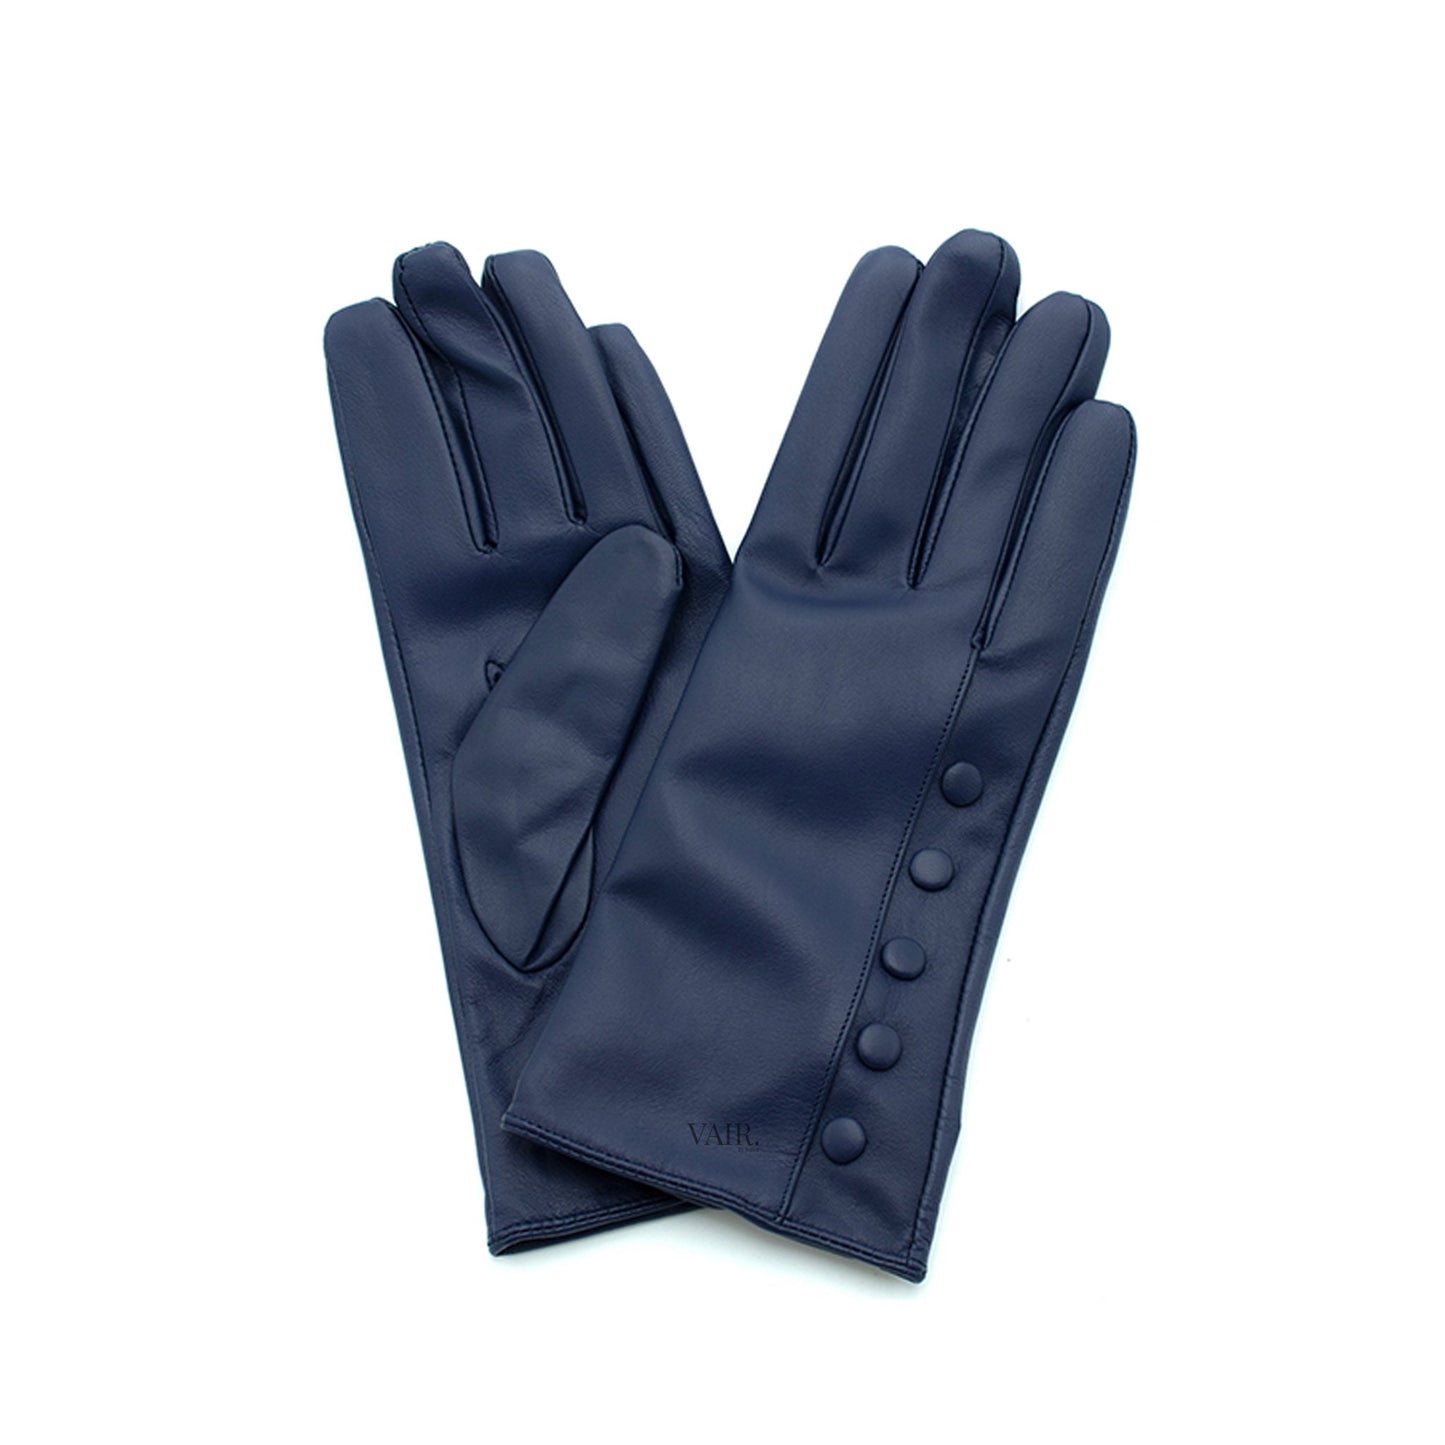 royal blue leather gloves with cashmere lining 